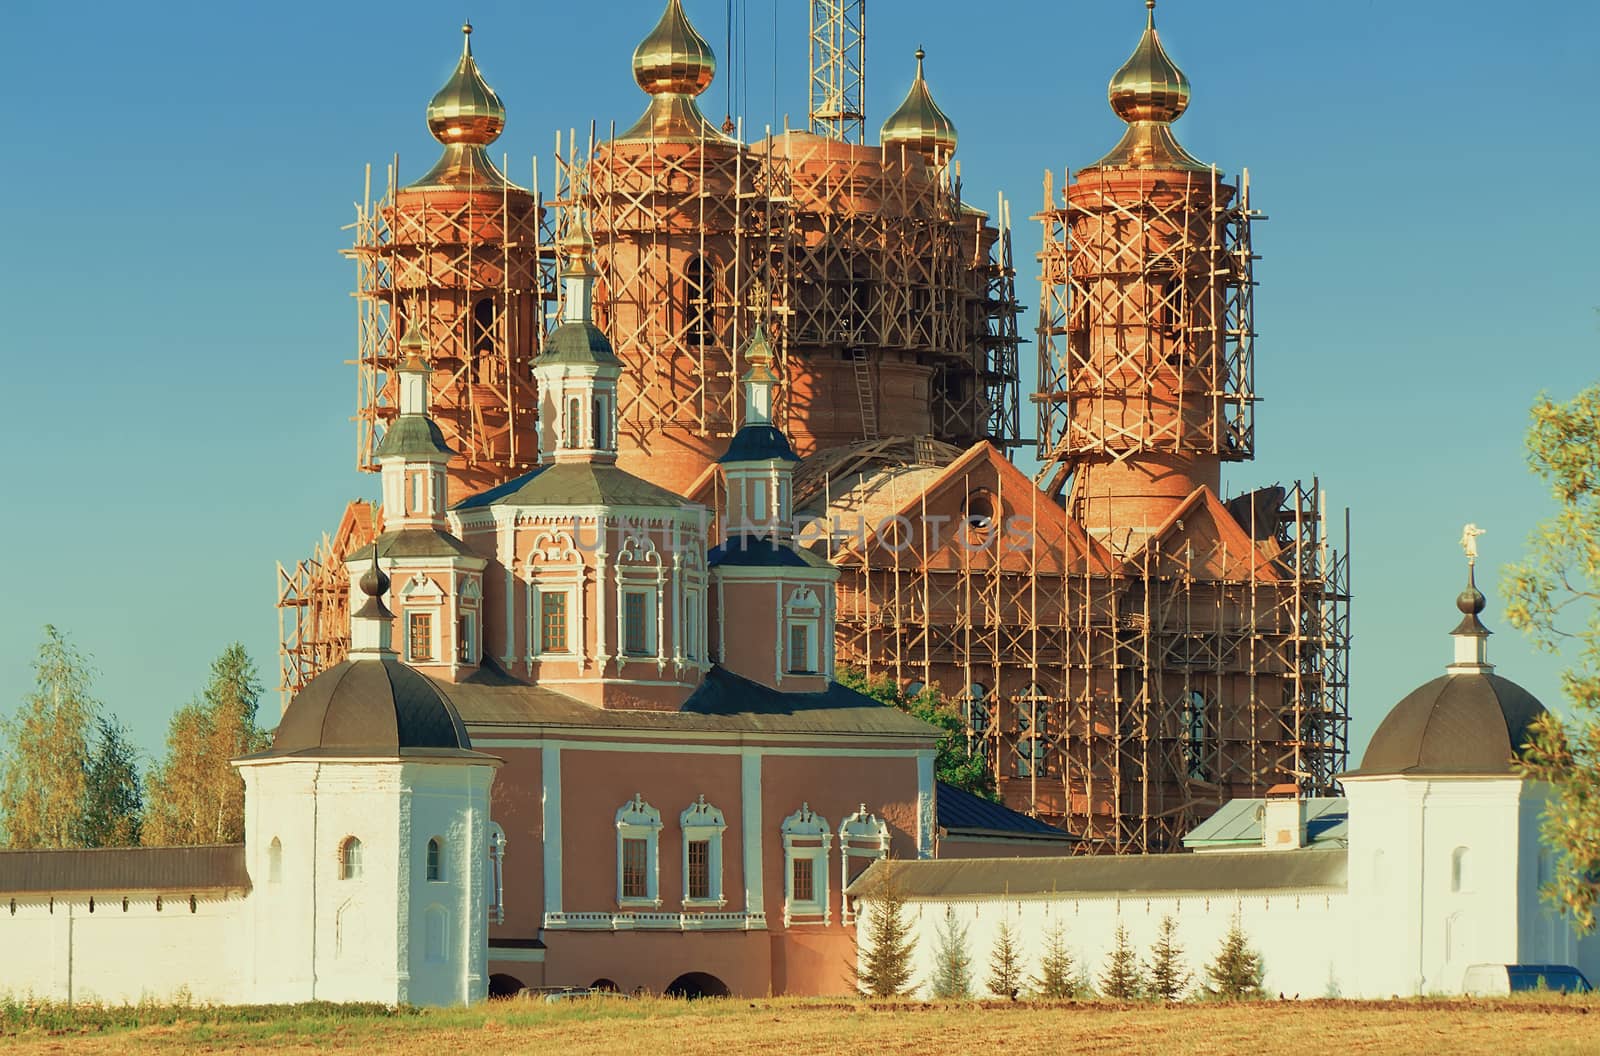 Behind a monastery wall visible to erect a temple with gold domes in scaffolding.